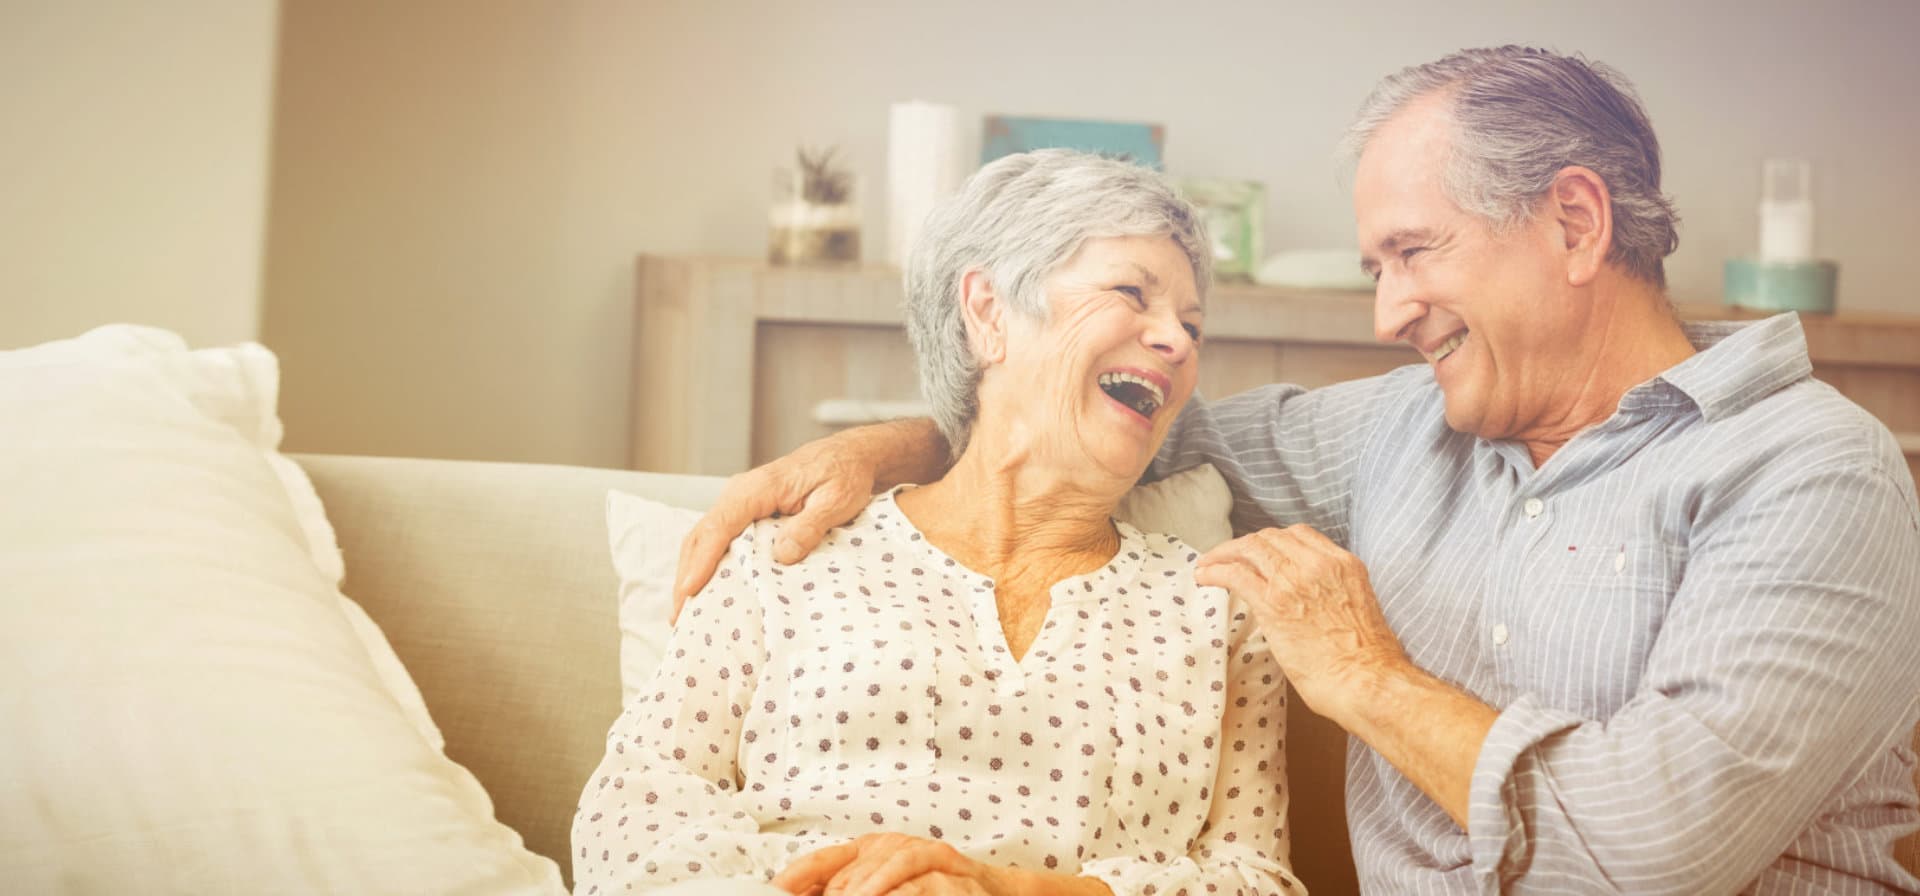 elderly couple smiling at each other